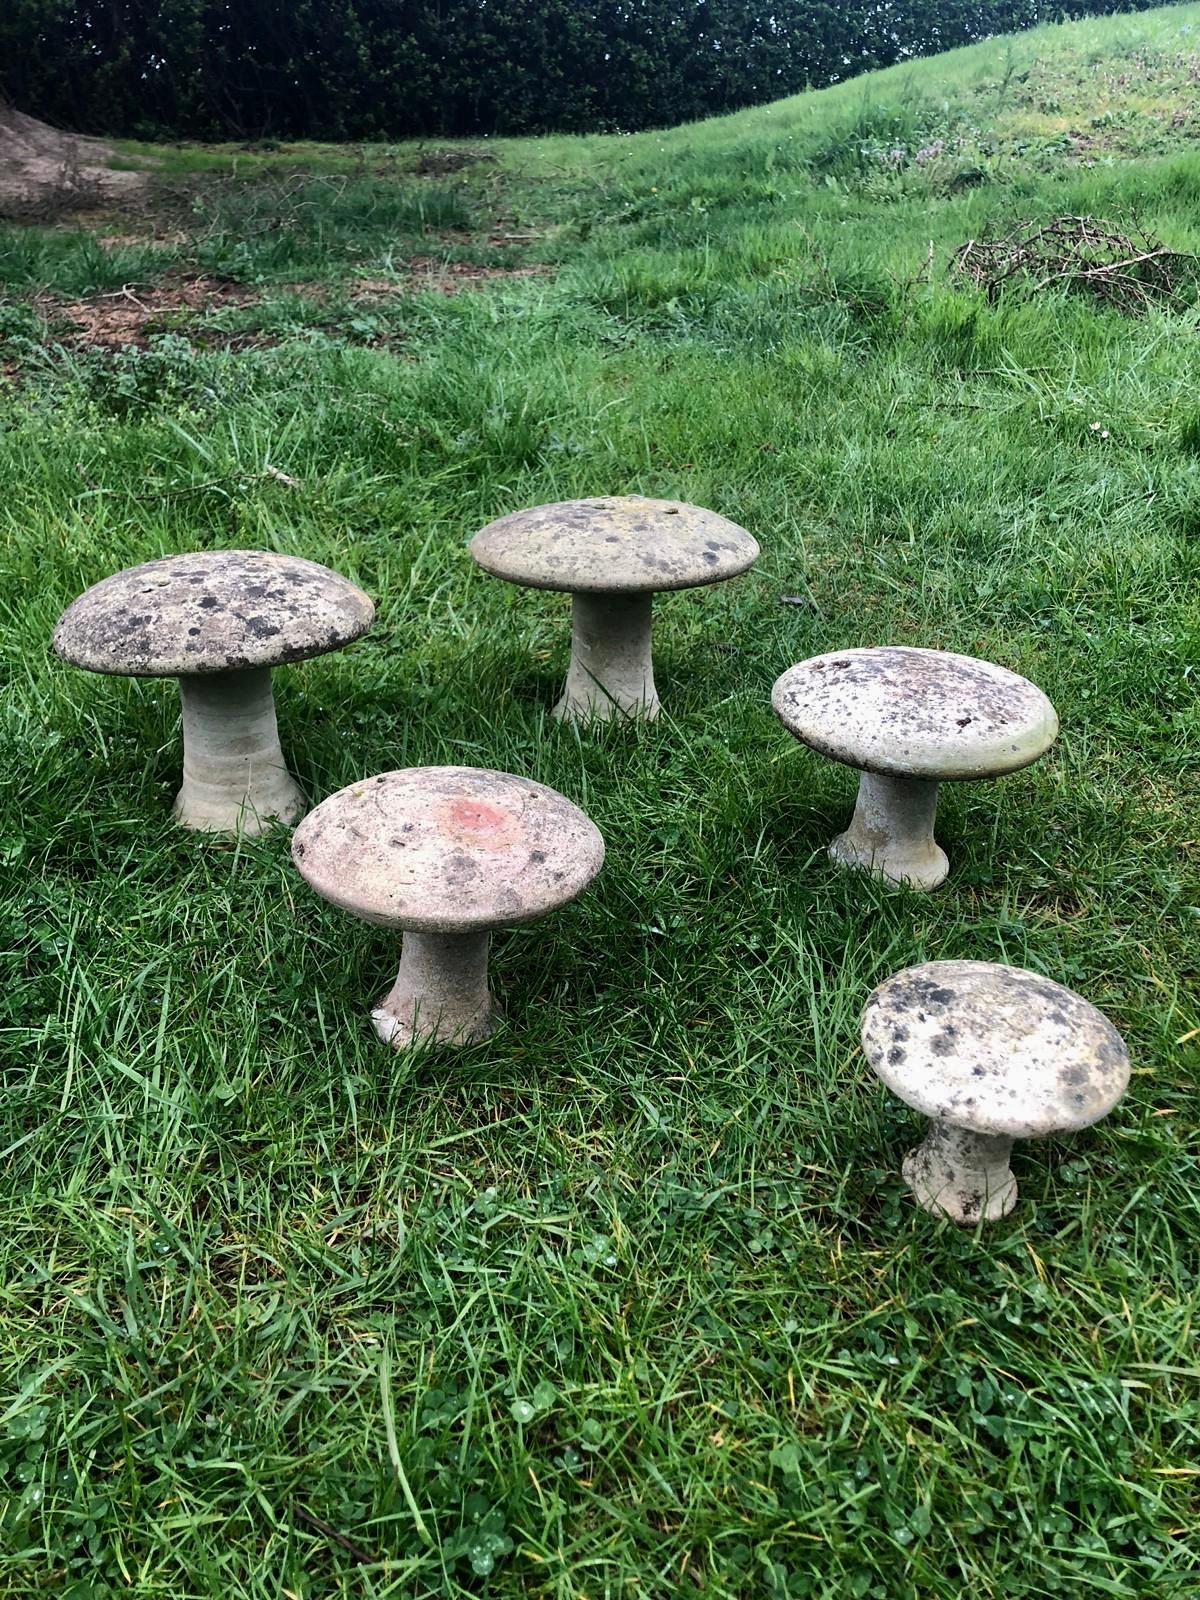 Great set of French concrete mushroom sculptures from the 1950s. Great patina and age. Cool piece of art for your outdoor space. Pictured as they were found in the French countryside. Sold as a set of 5.

3 sizes.

2 large mushrooms - 10.3